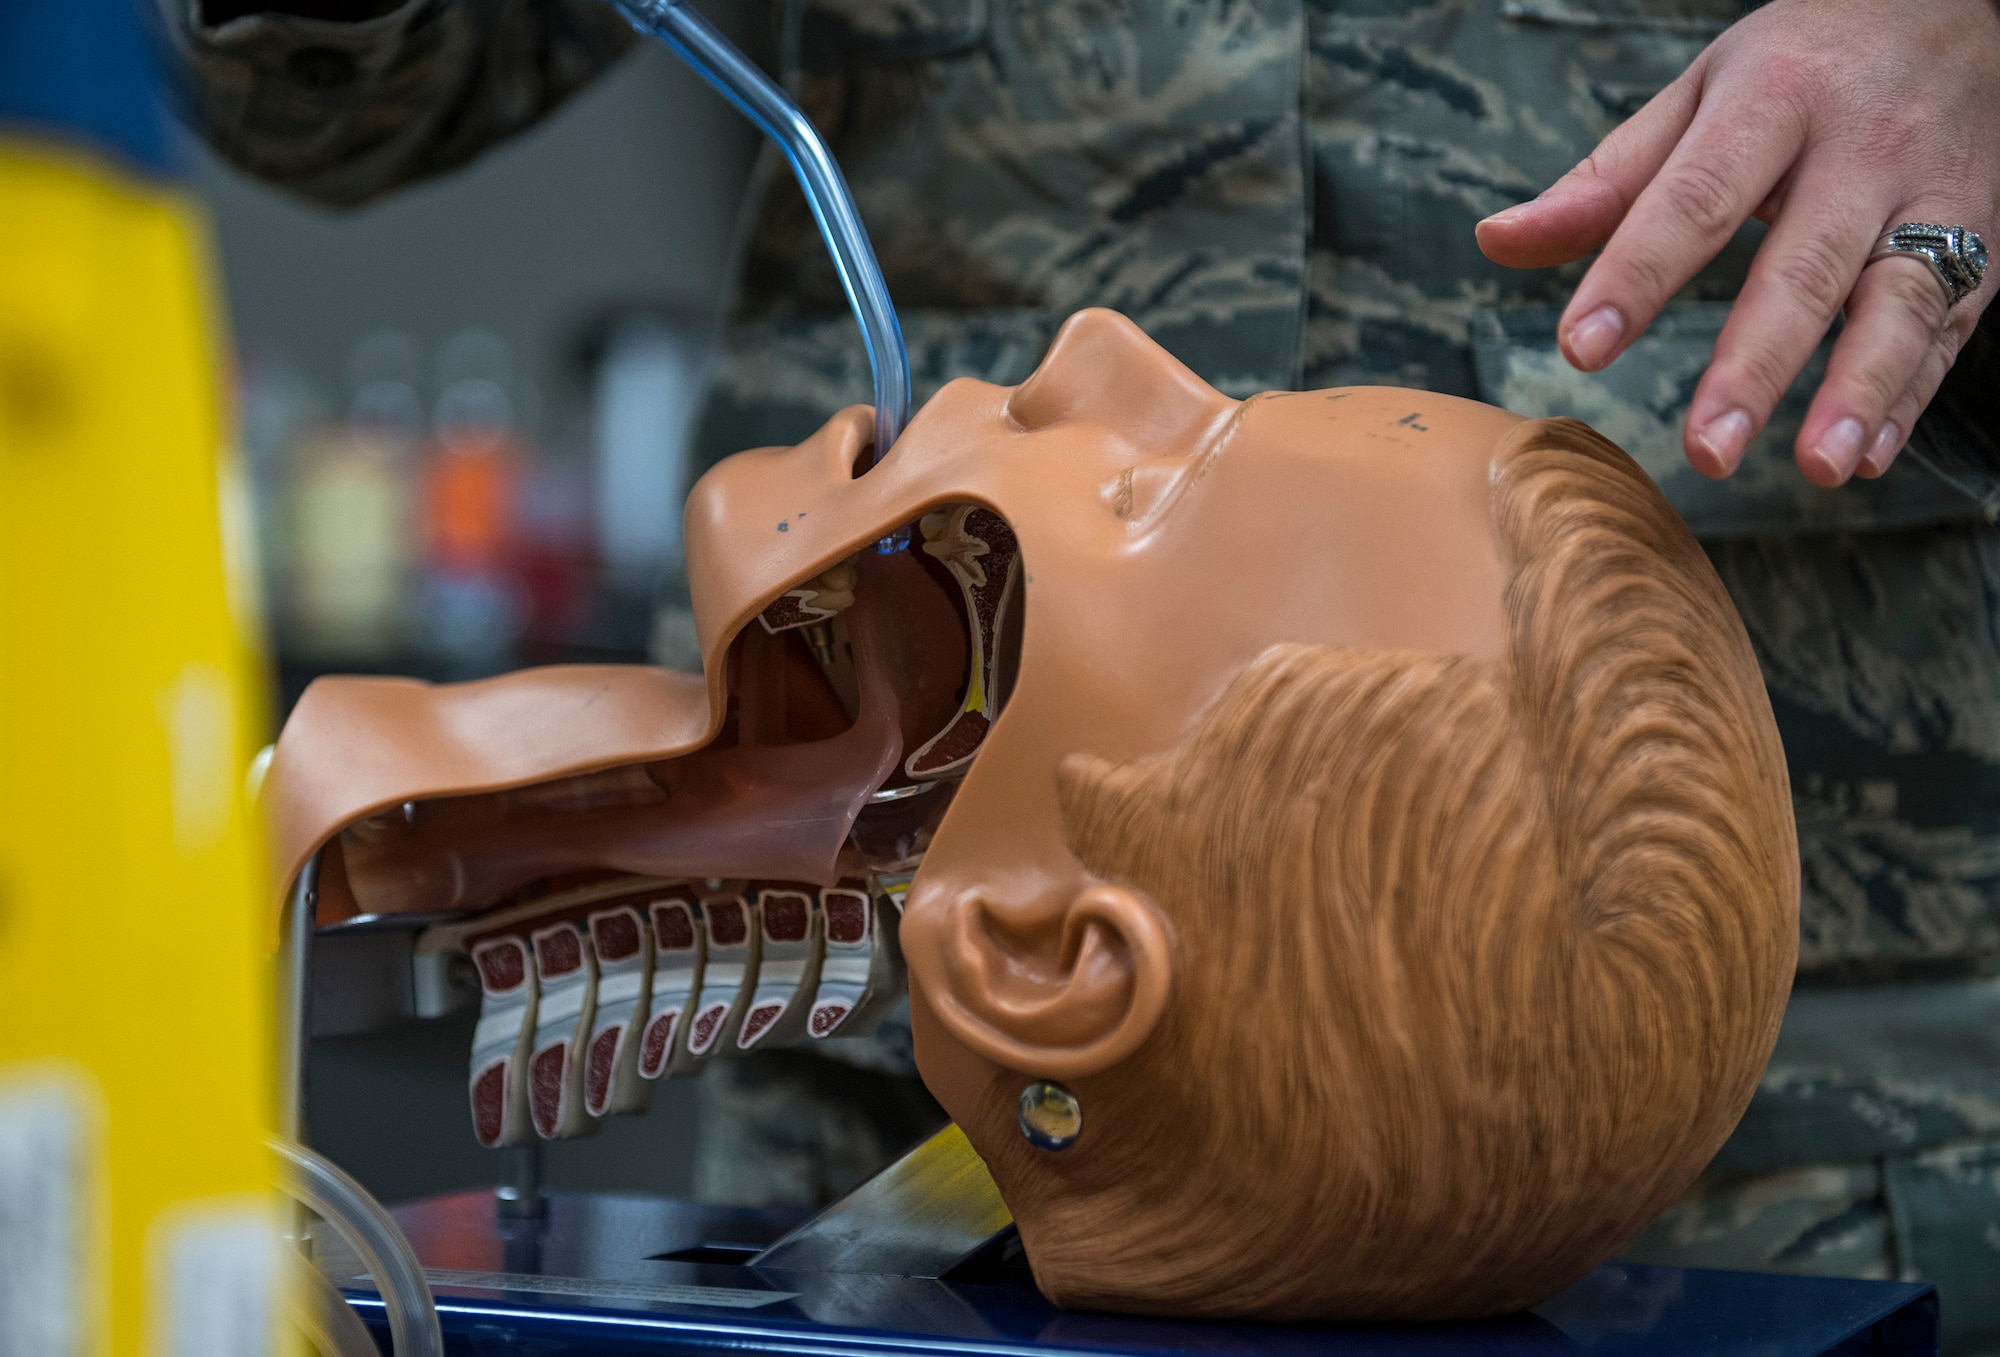 A student simulates clears a patient’s airway during an Emergency Medical Technician refresher course, Oct. 31, 2016, at Moody Air Force Base, Ga. In this scenario, students were tasked to use suction to remove anything obstructing the patient’s ability to breathe. (U.S. Air Force photo by Airman 1st Class Janiqua P. Robinson)